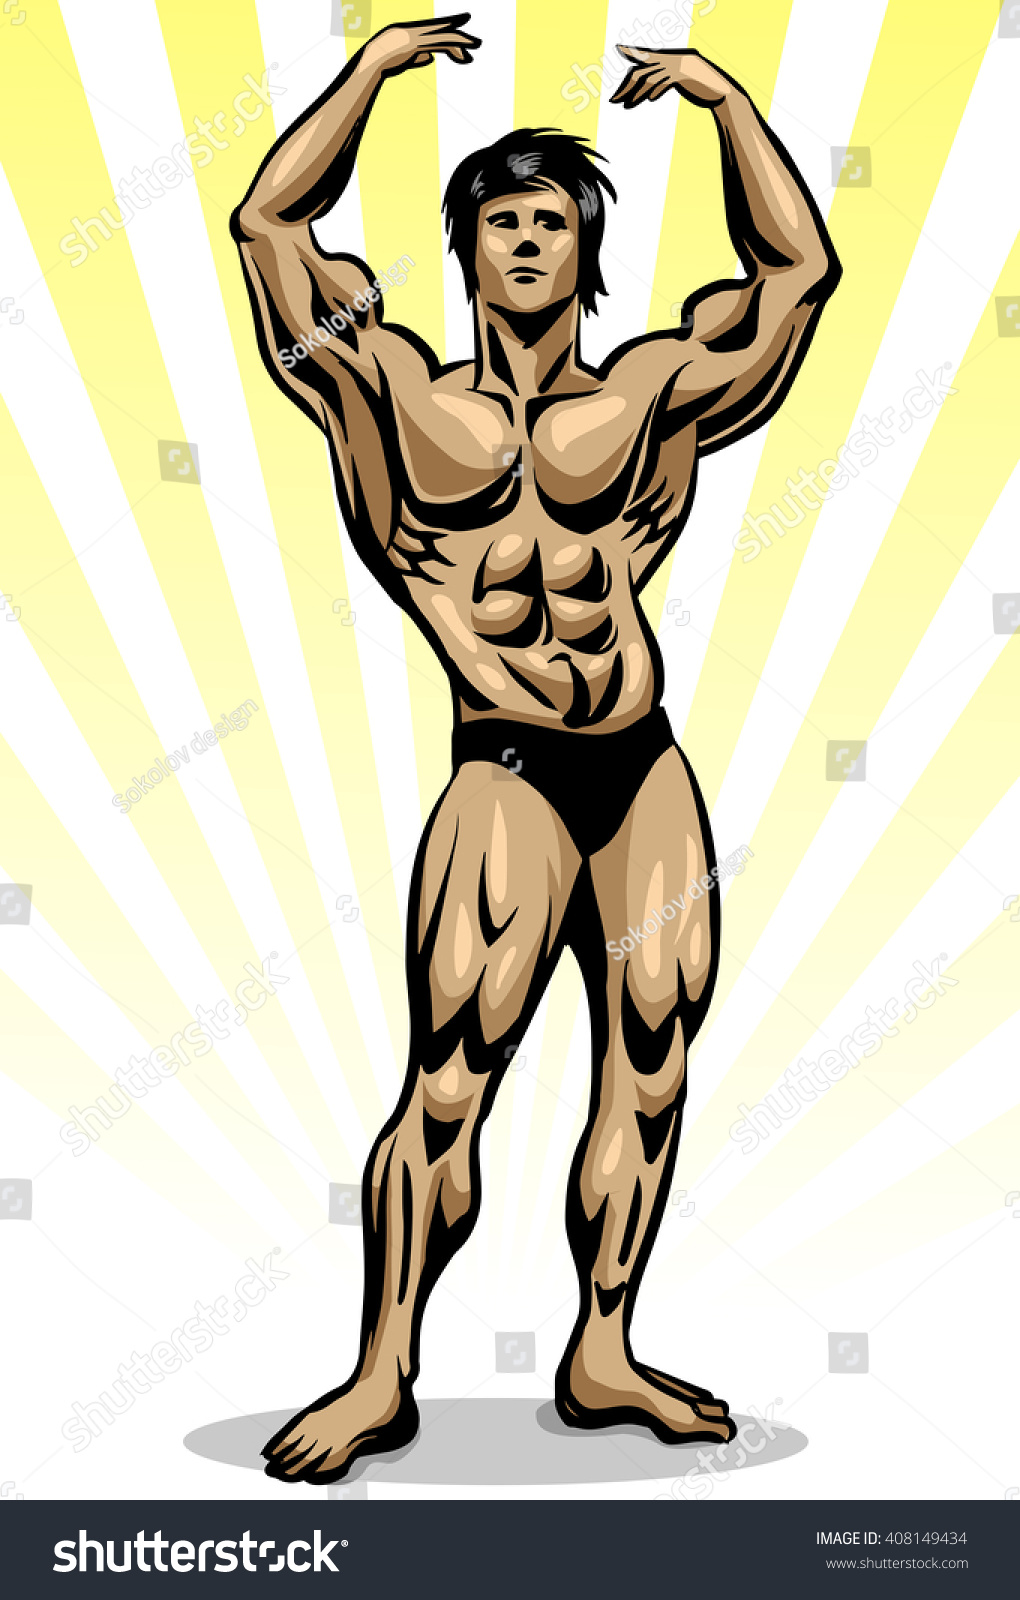 Bodybuilder Front Double Biceps Pose Aesthetic Stock Vector Royalty Free 408149434 Shutterstock 6259